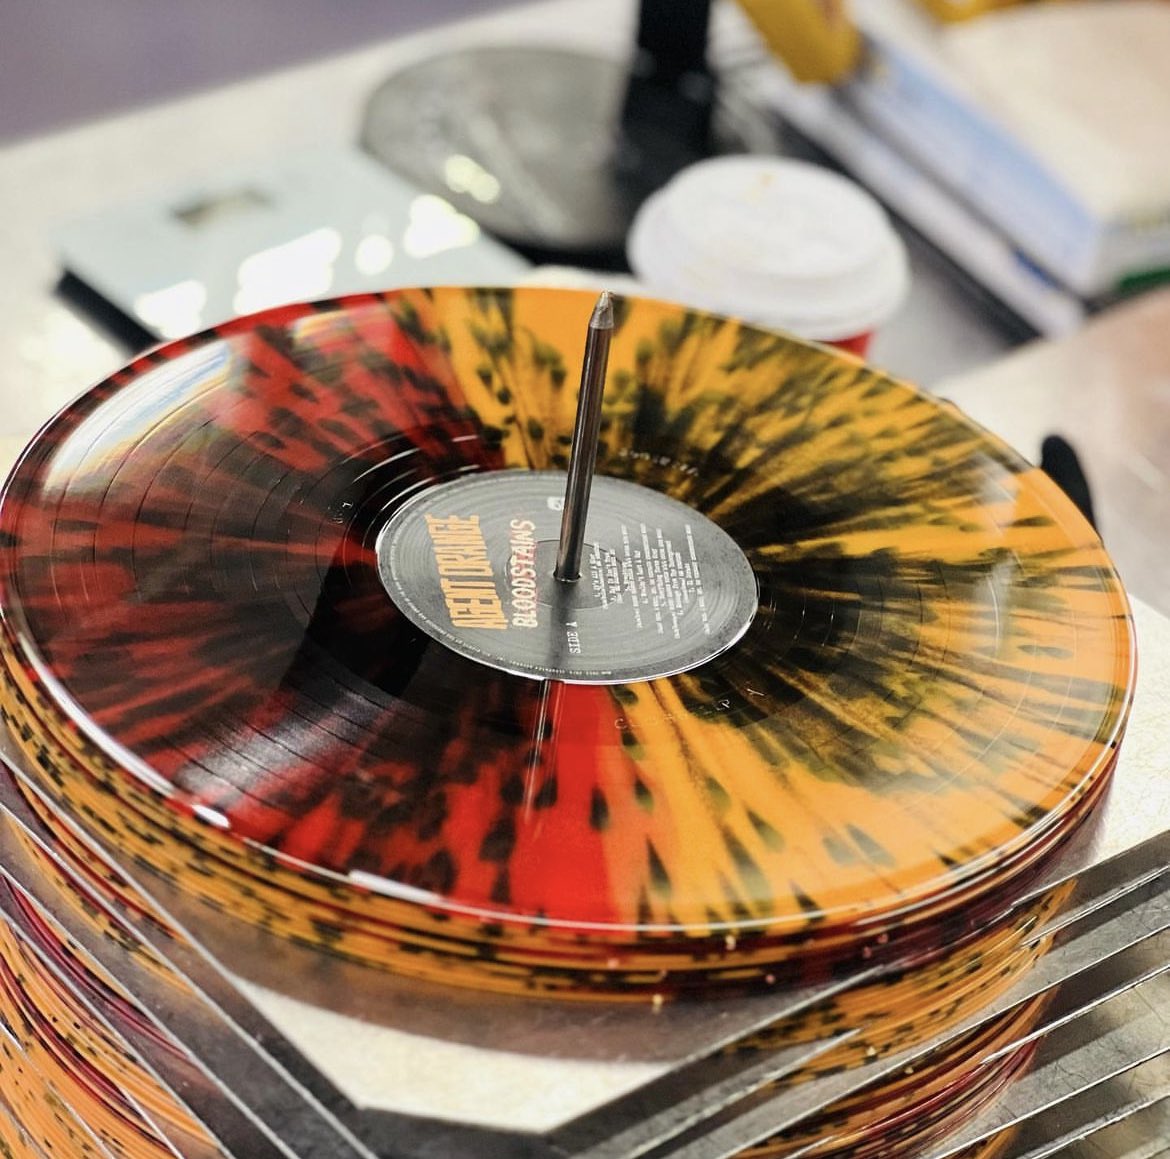 Some BTS of one of our more recent special effect records for Agent Orange! #behindthescenes #vinyl #recordpressing #splattereffect